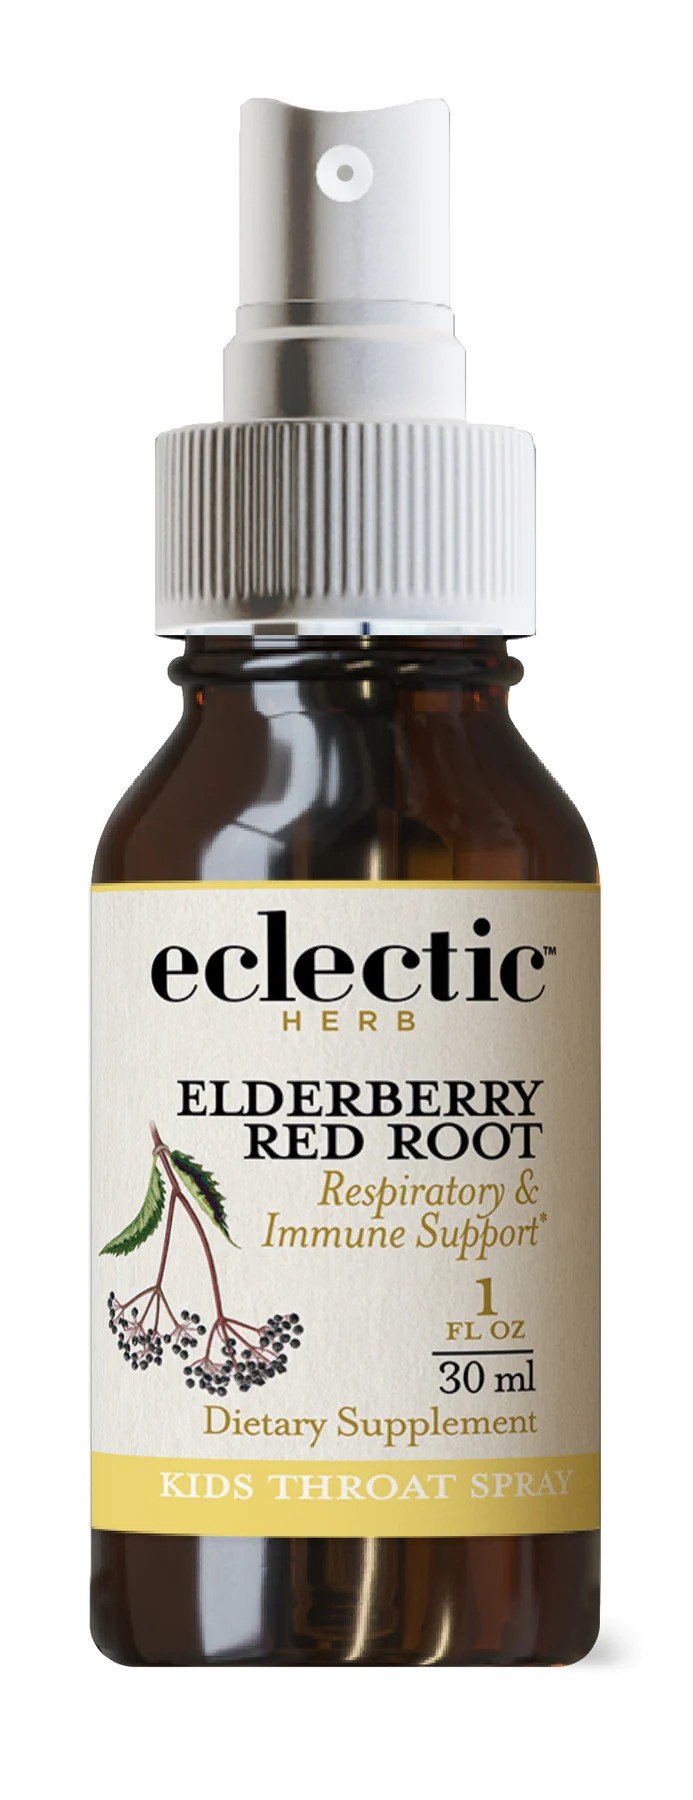 Elderberry Red Root | Eclectic Herb | Respiratory System | Immune System | Kids Throat Spray | Dietary Supplement | 1 fluid ounce | 30 milliliters | VitaminLife